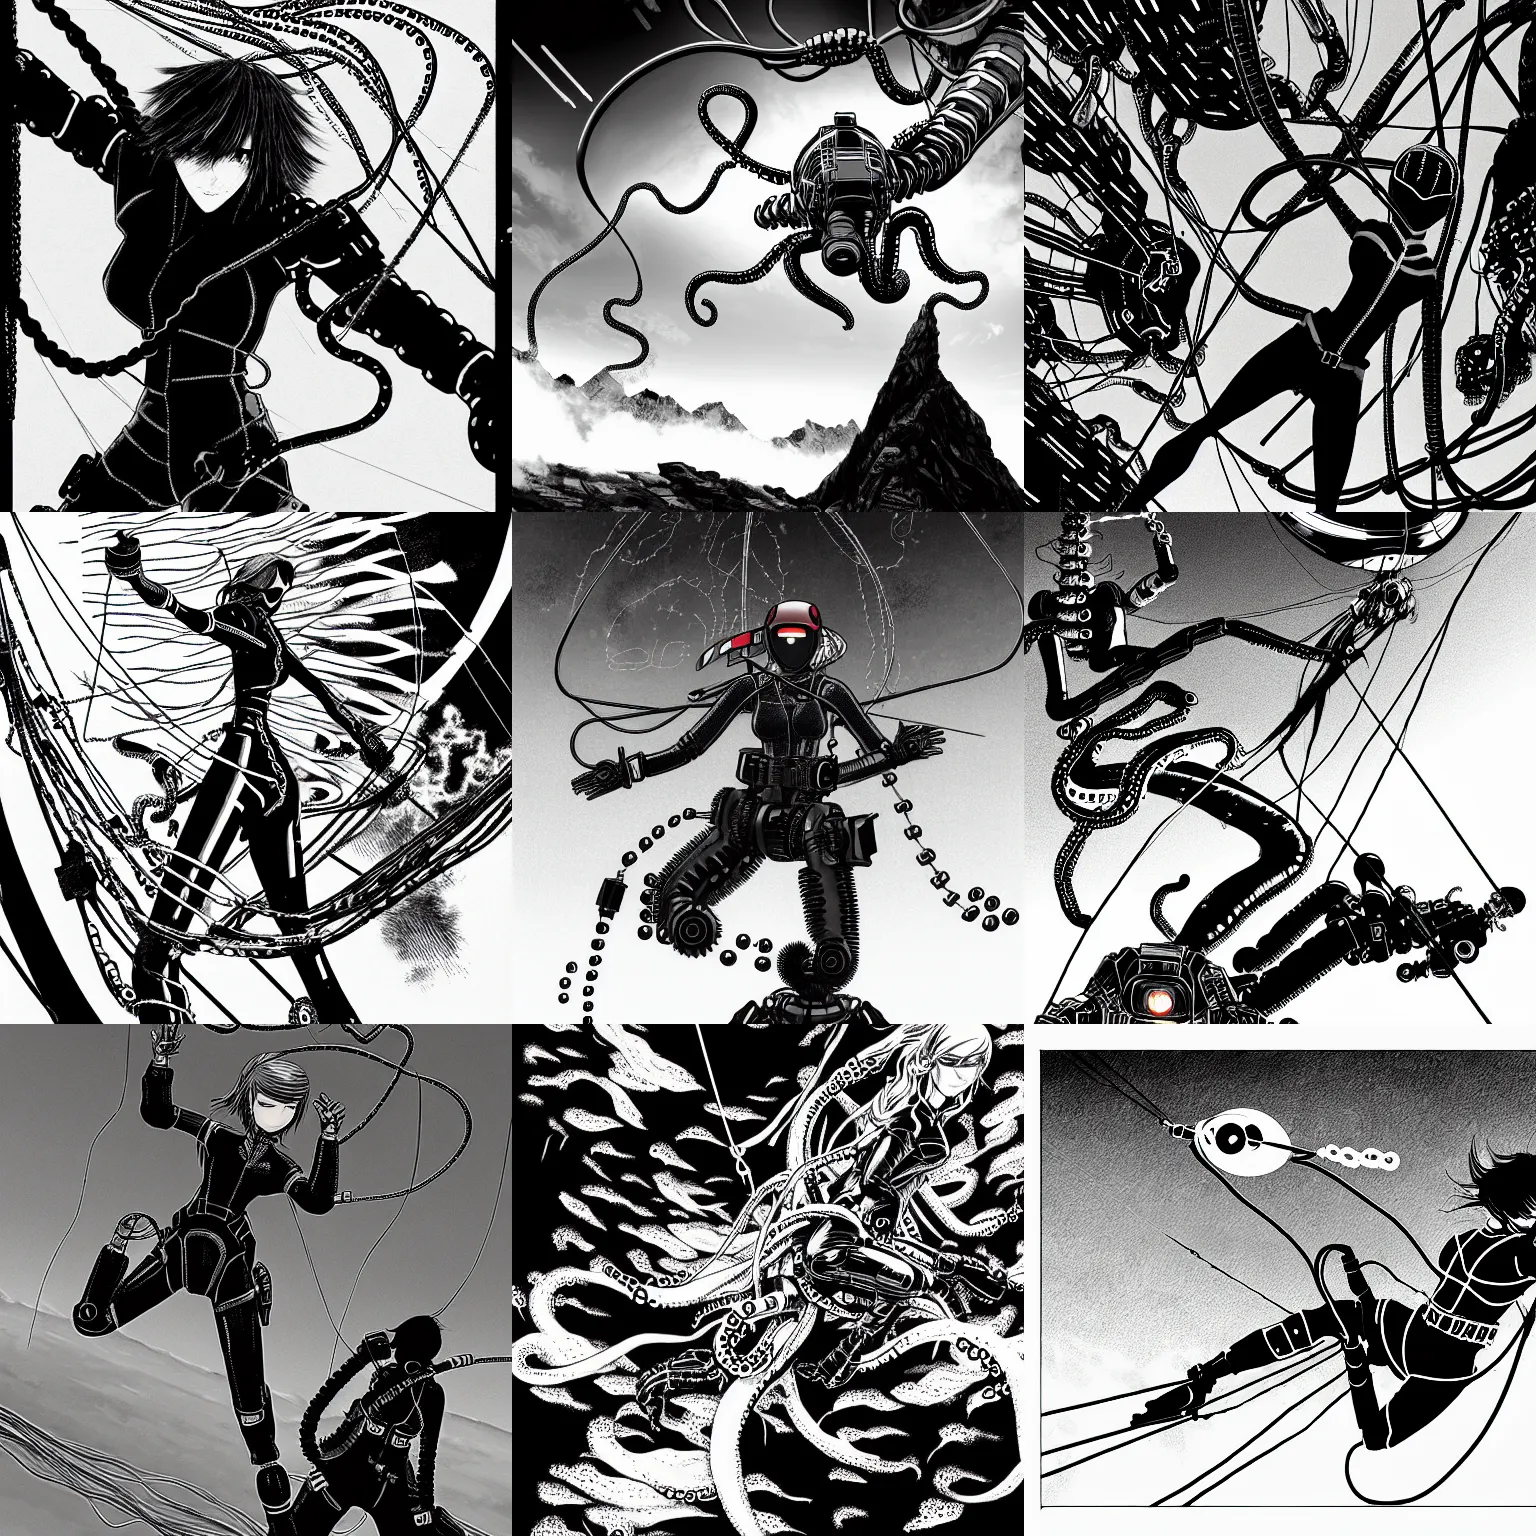 Prompt: black widow flies with a parachute from everest and fires pistols at robots with tentacles, by tsutomu nihei, black and white, wires clouds background